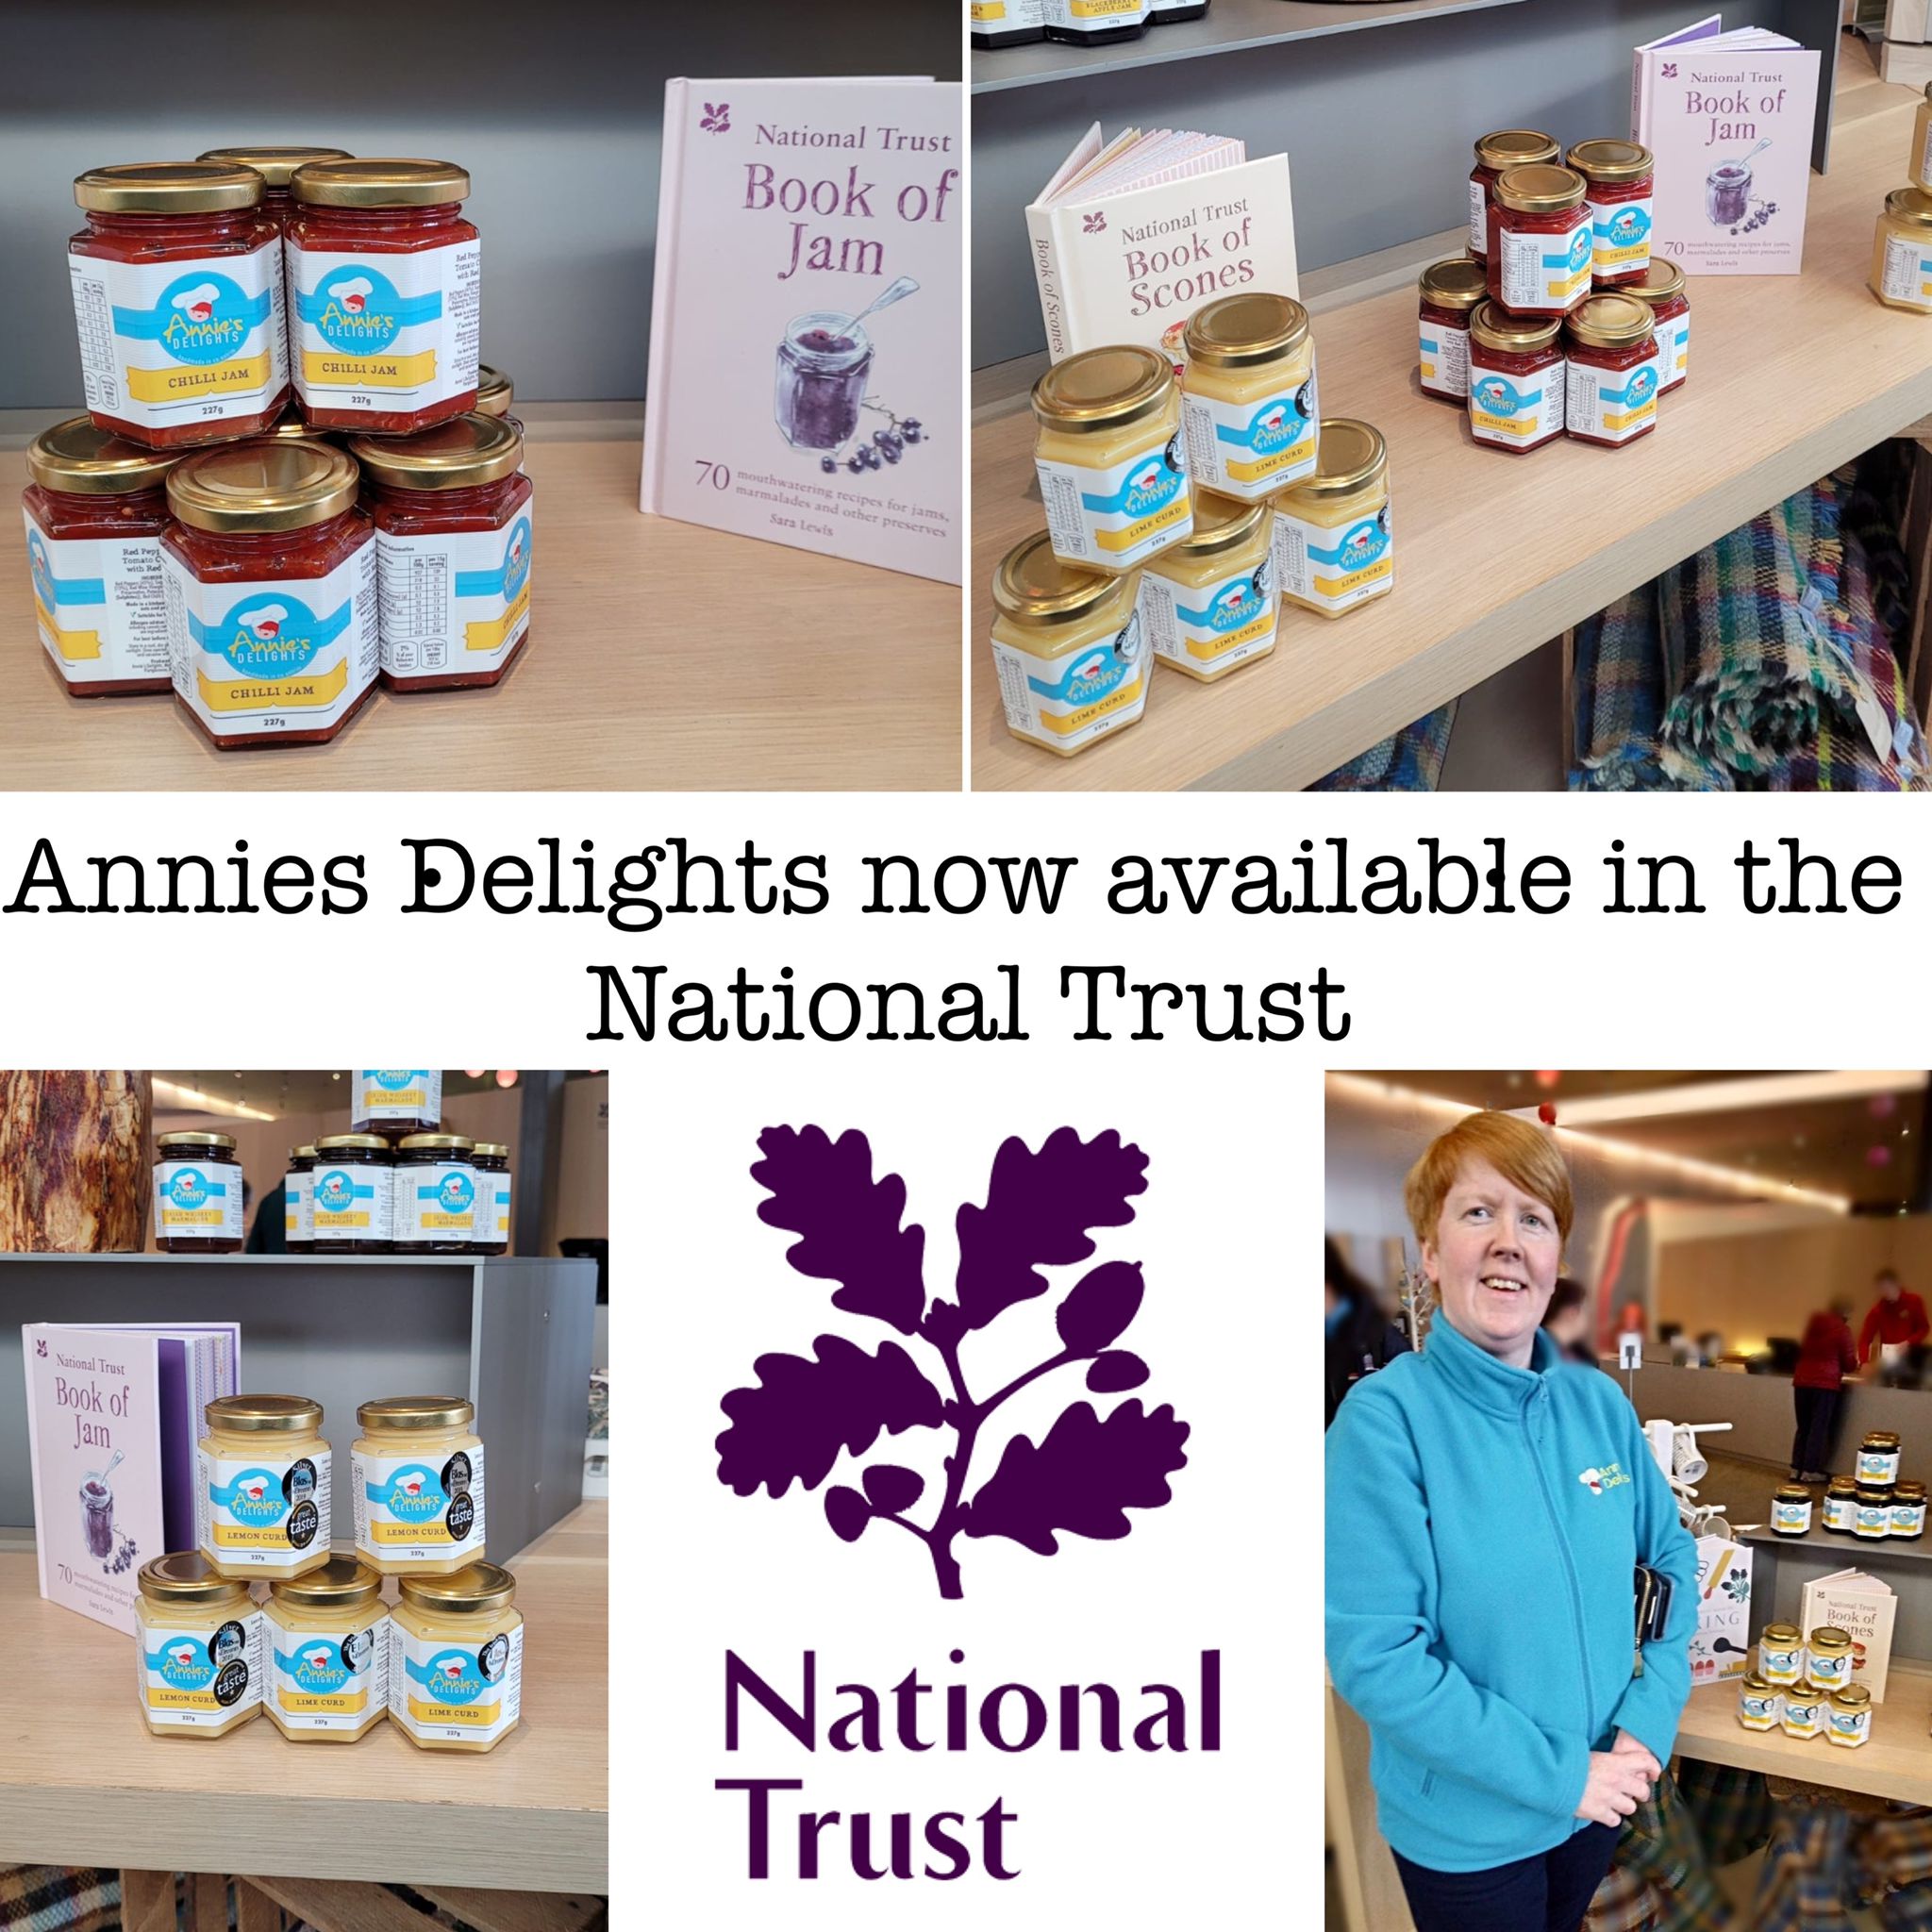 New listing for Annie's Delights